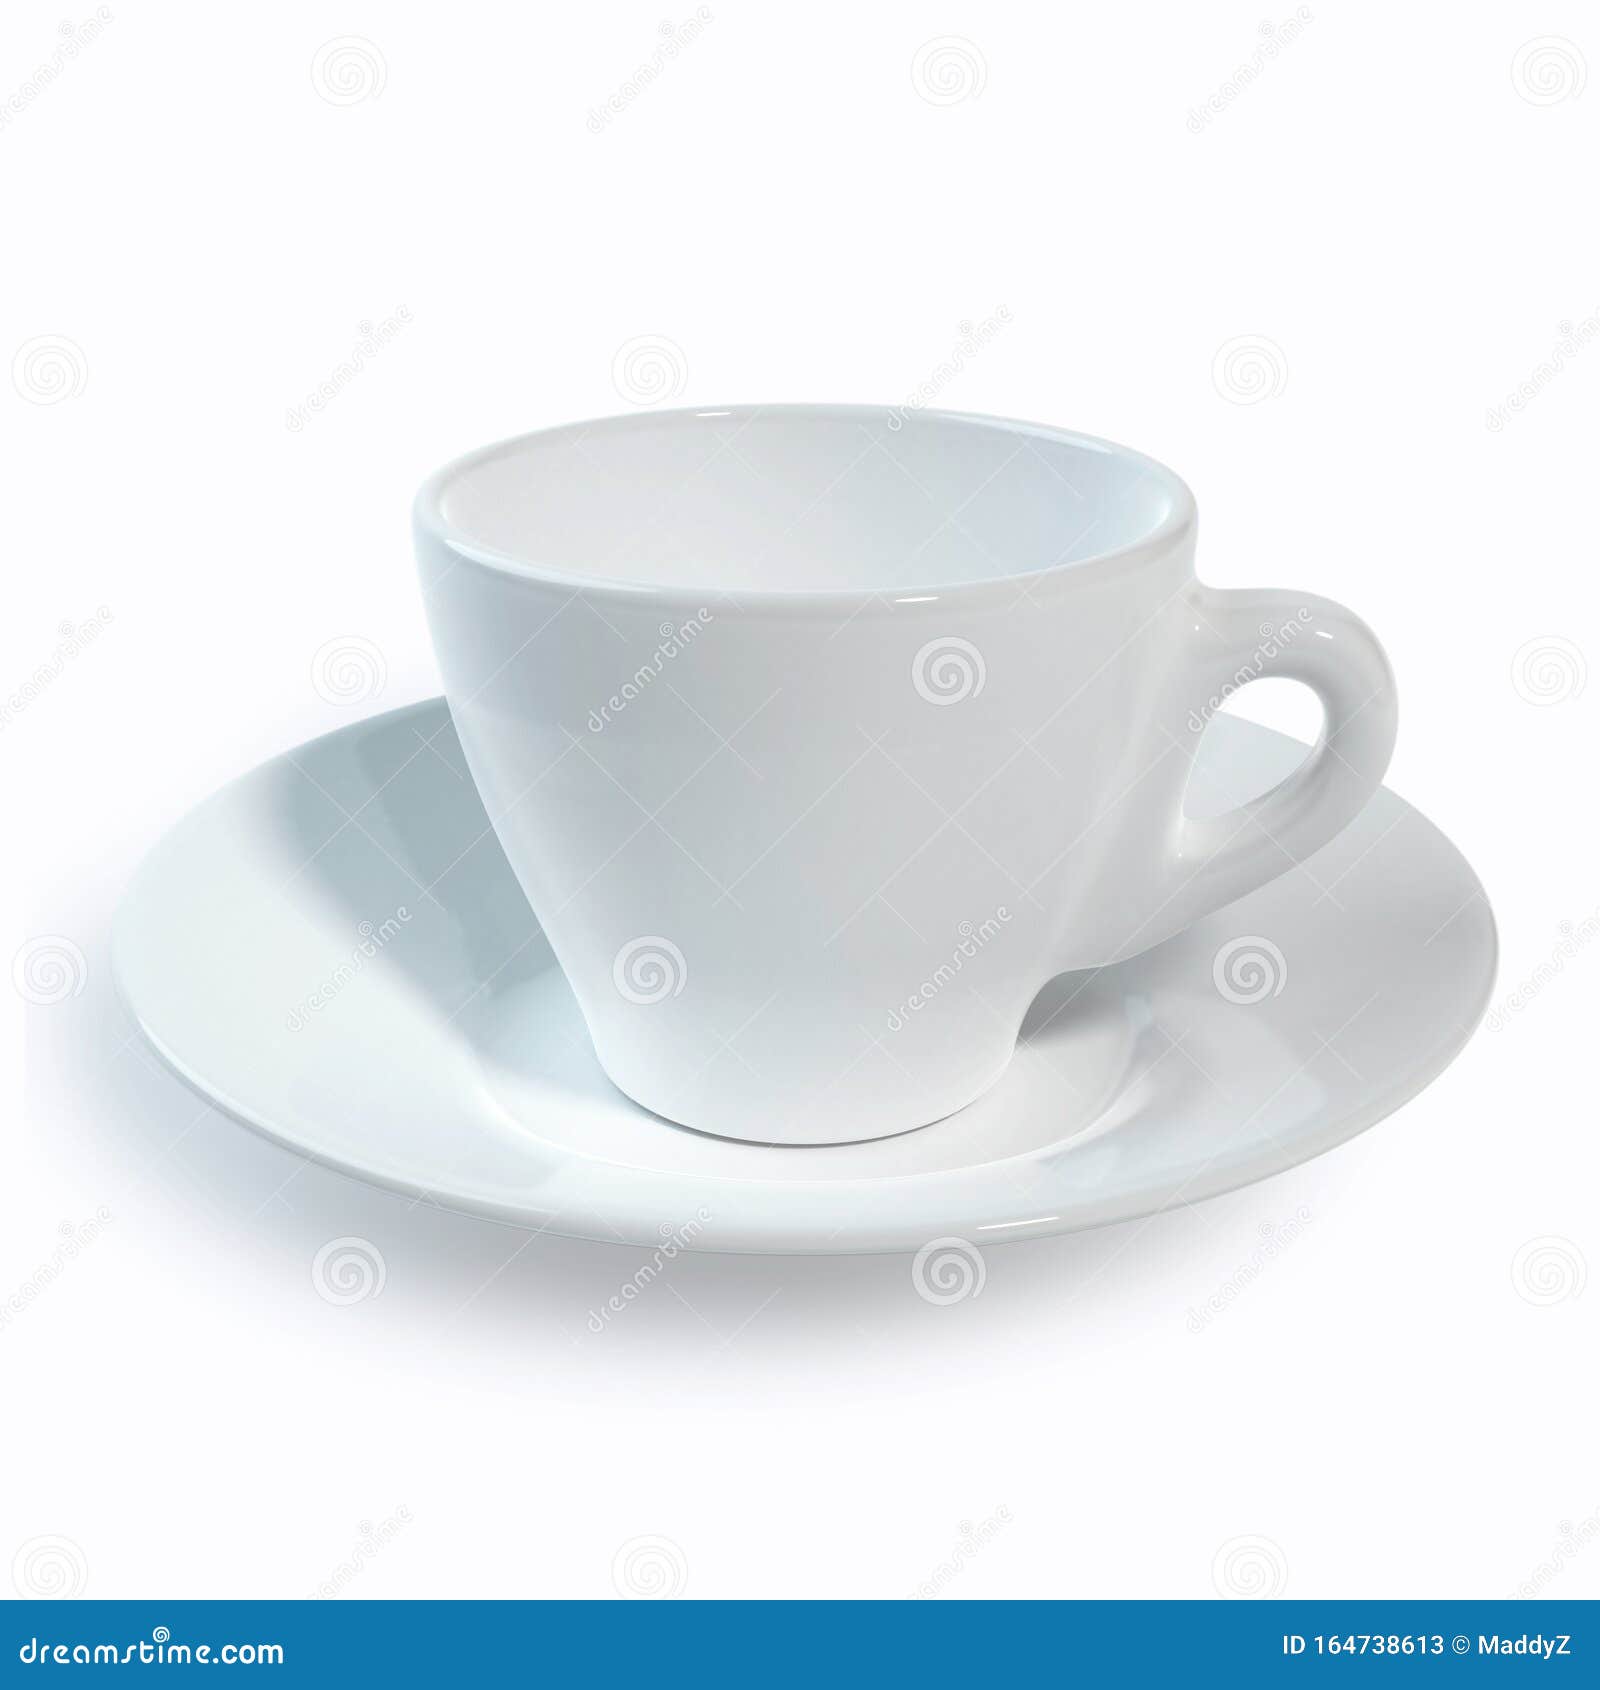 White Ceramic Coffee Espresso Cup With Saucer The Mock Up Stock Image Image Of Kitchen Background 164738613